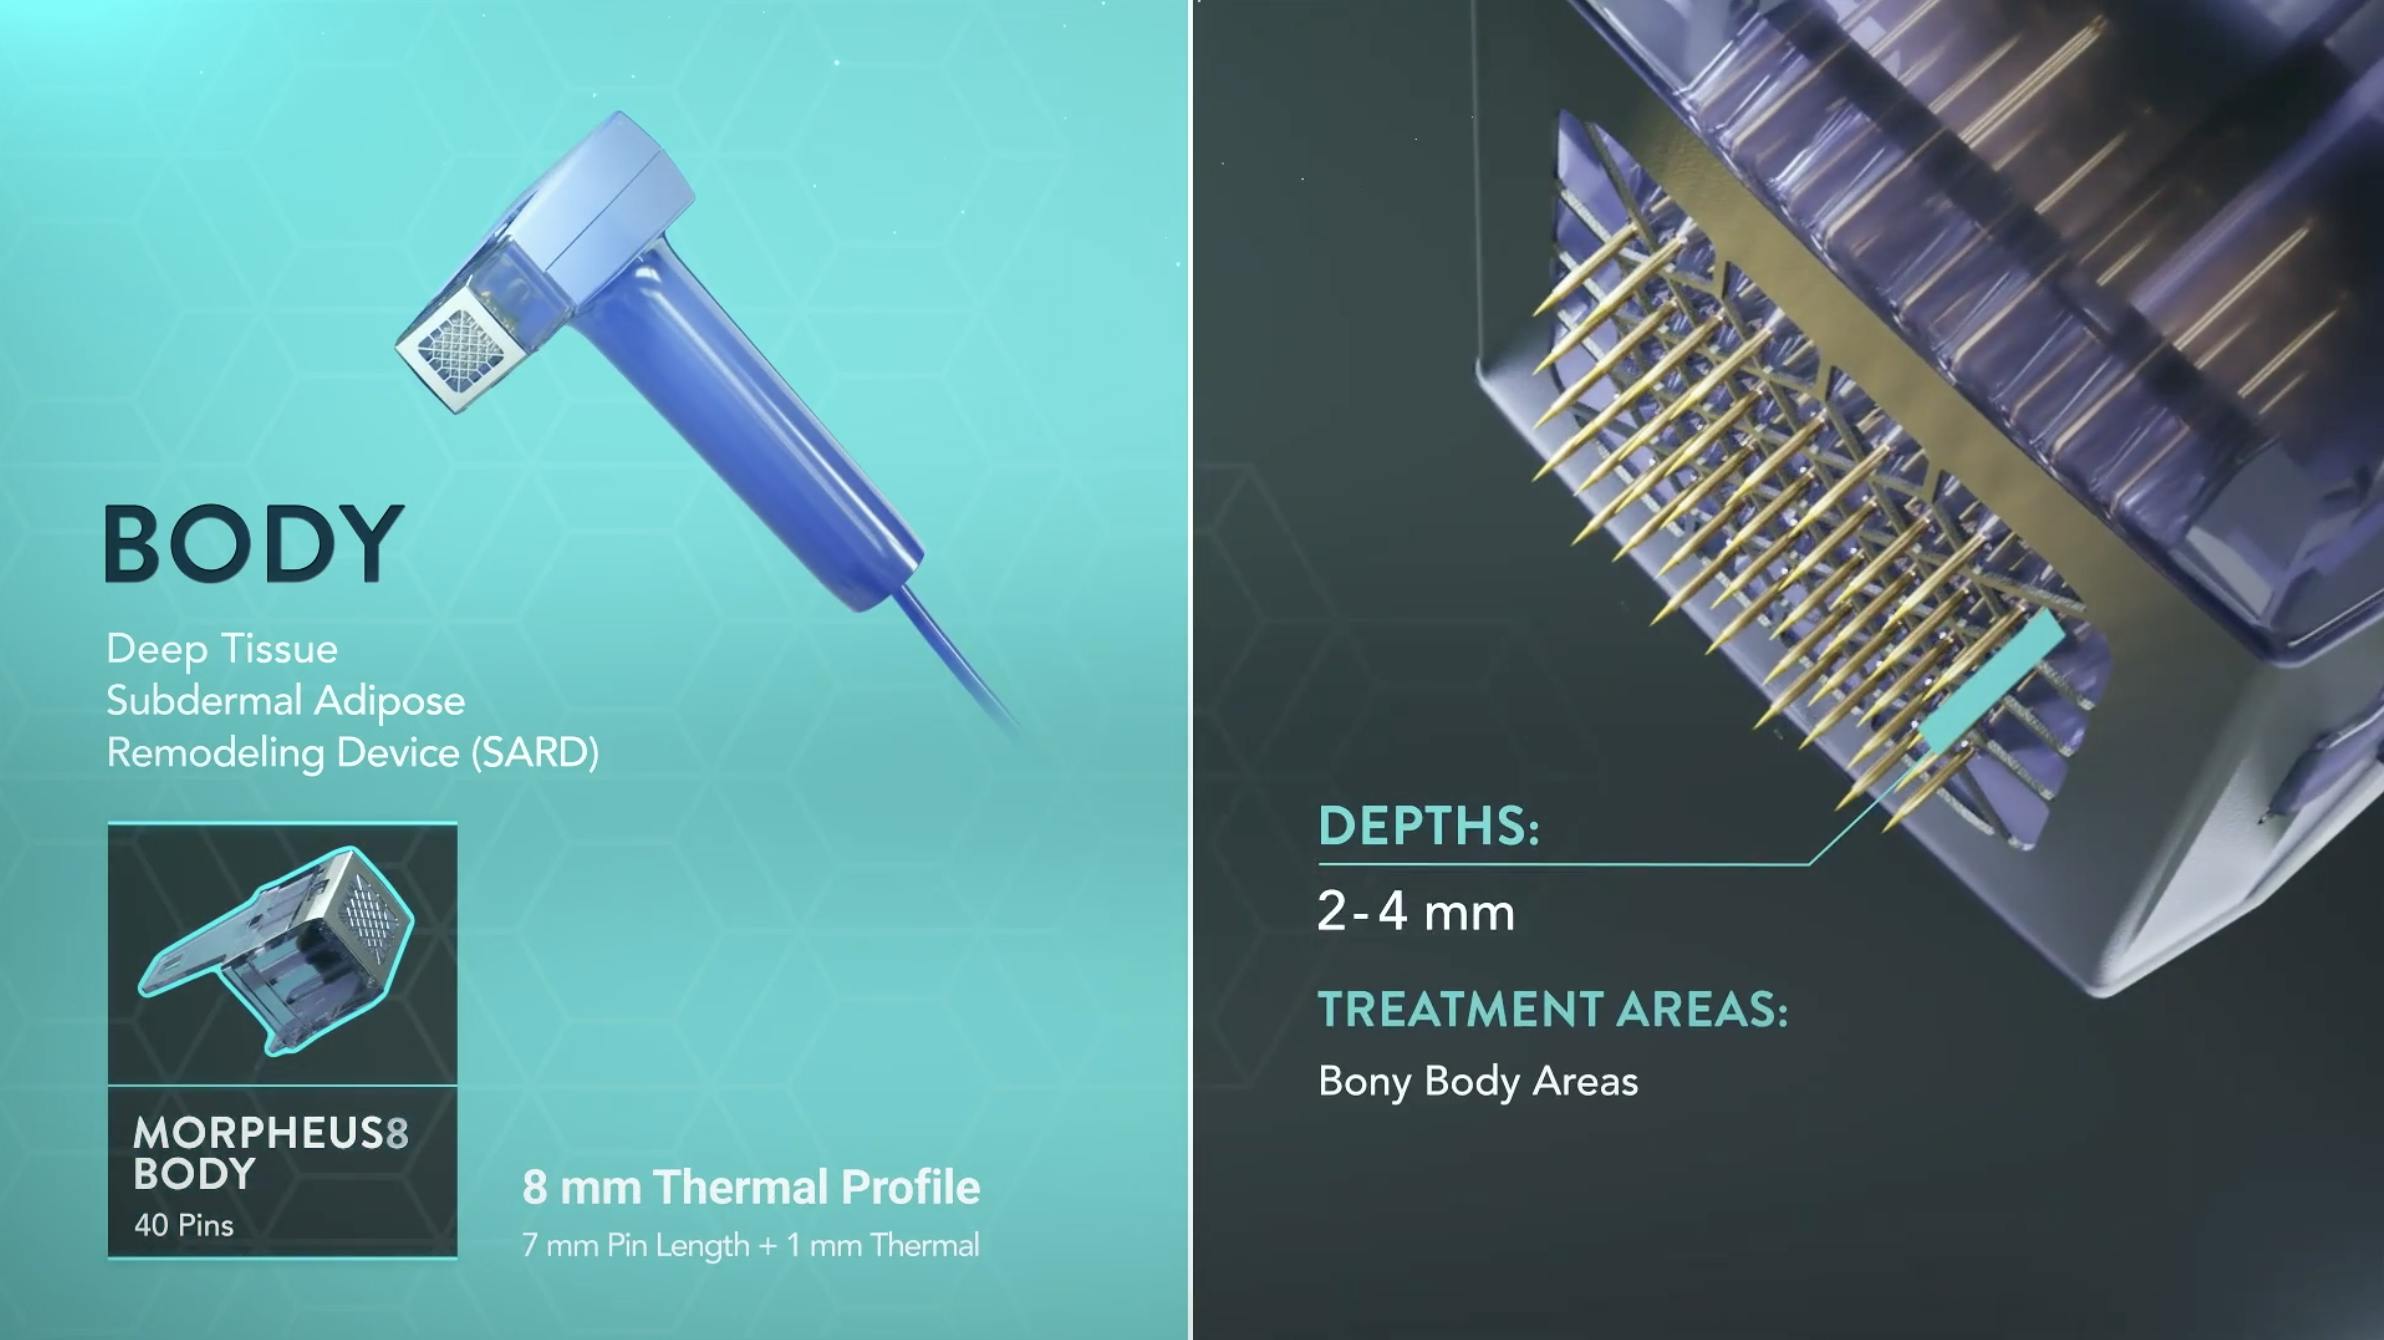 animated image showing the morpheus8 for body device